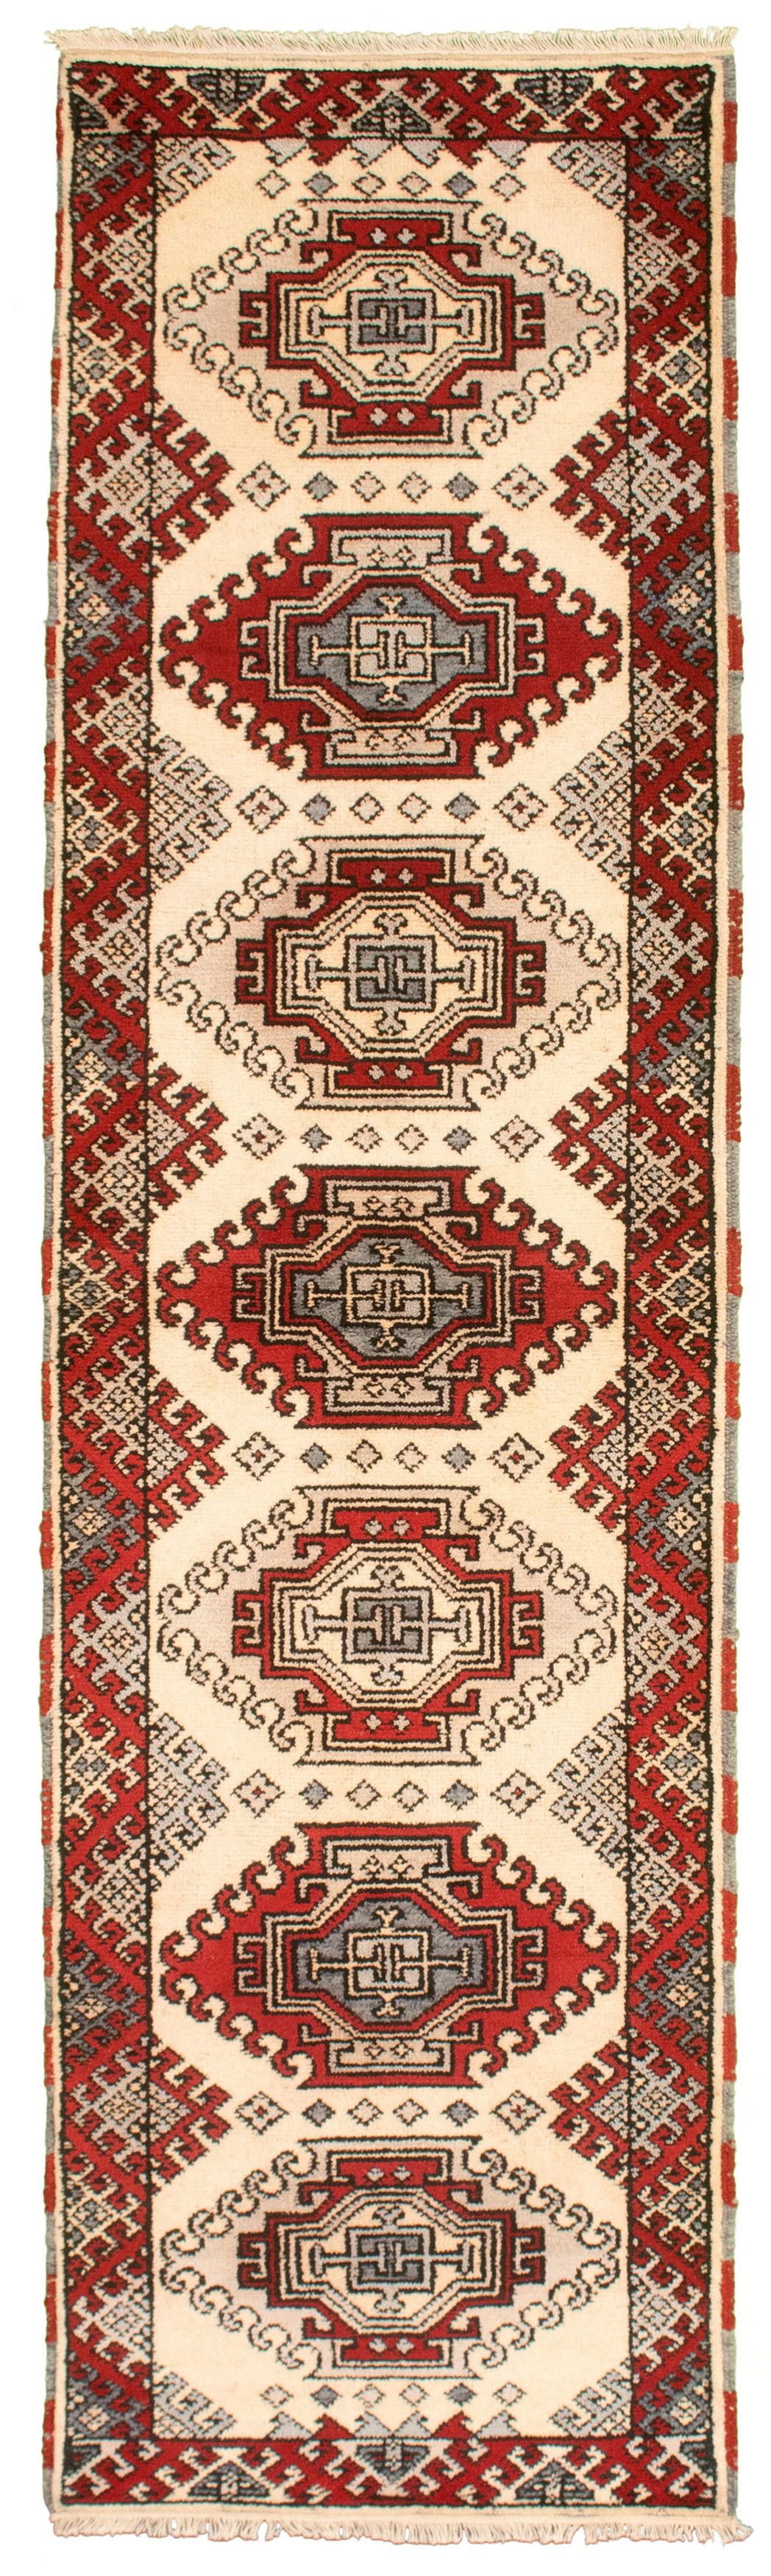 Hand-knotted Royal Kazak Cream, Red Wool Rug 2'9" x 9'10"  Size: 2'9" x 9'10"  